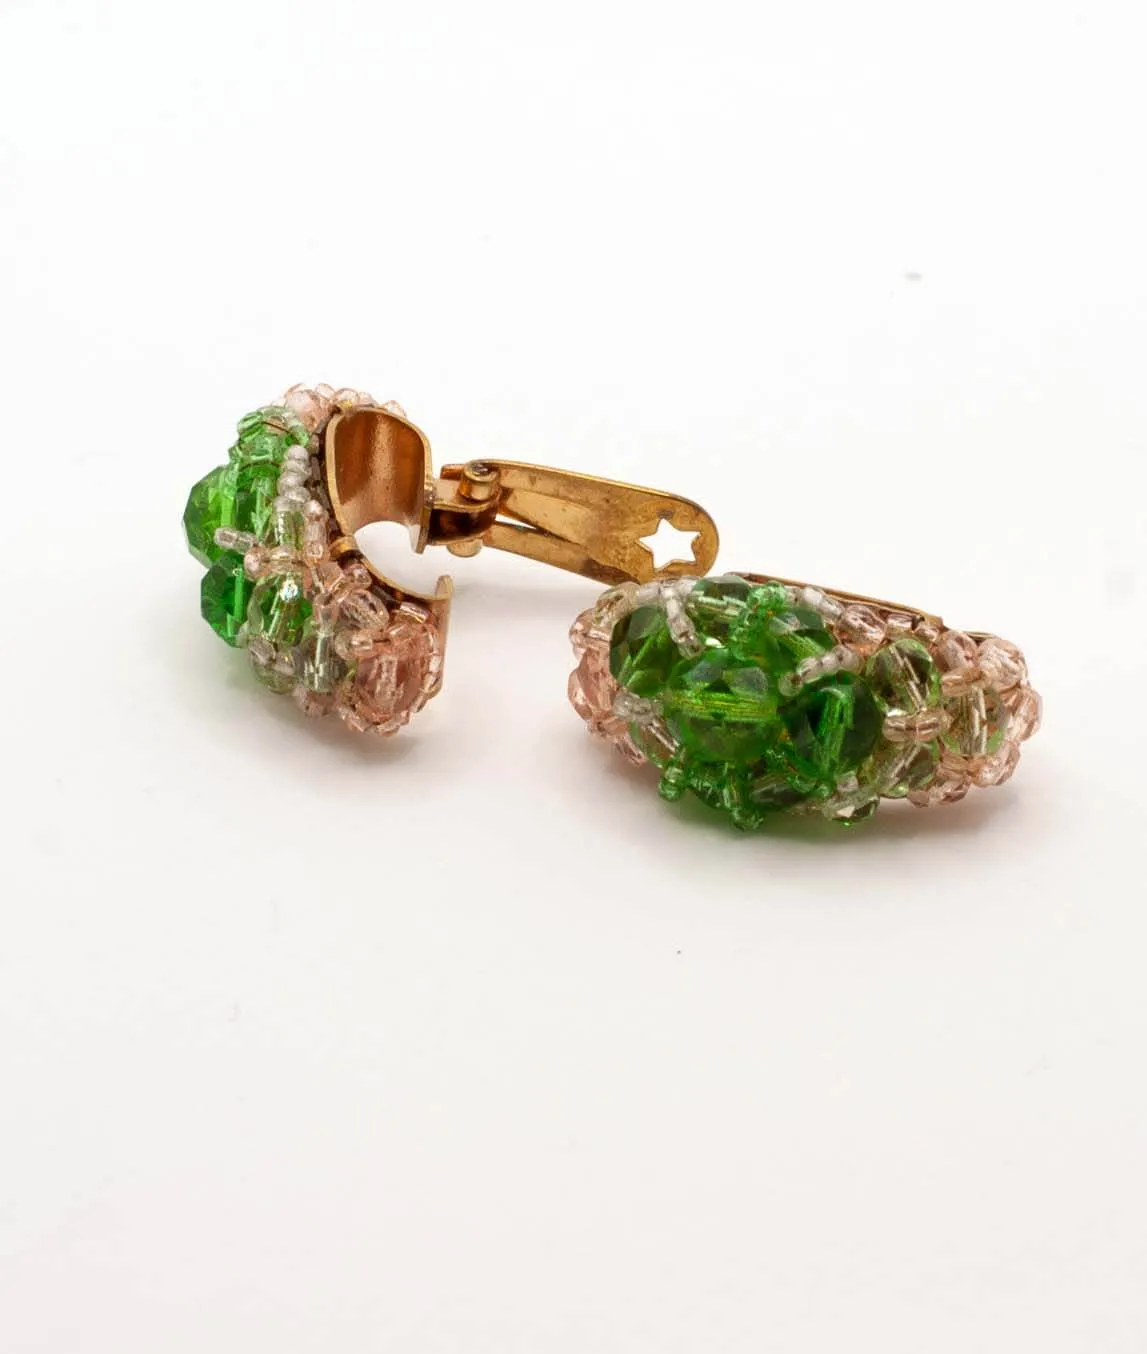 Green and pink beaded Coppola e Toppo earrings from the 1950s